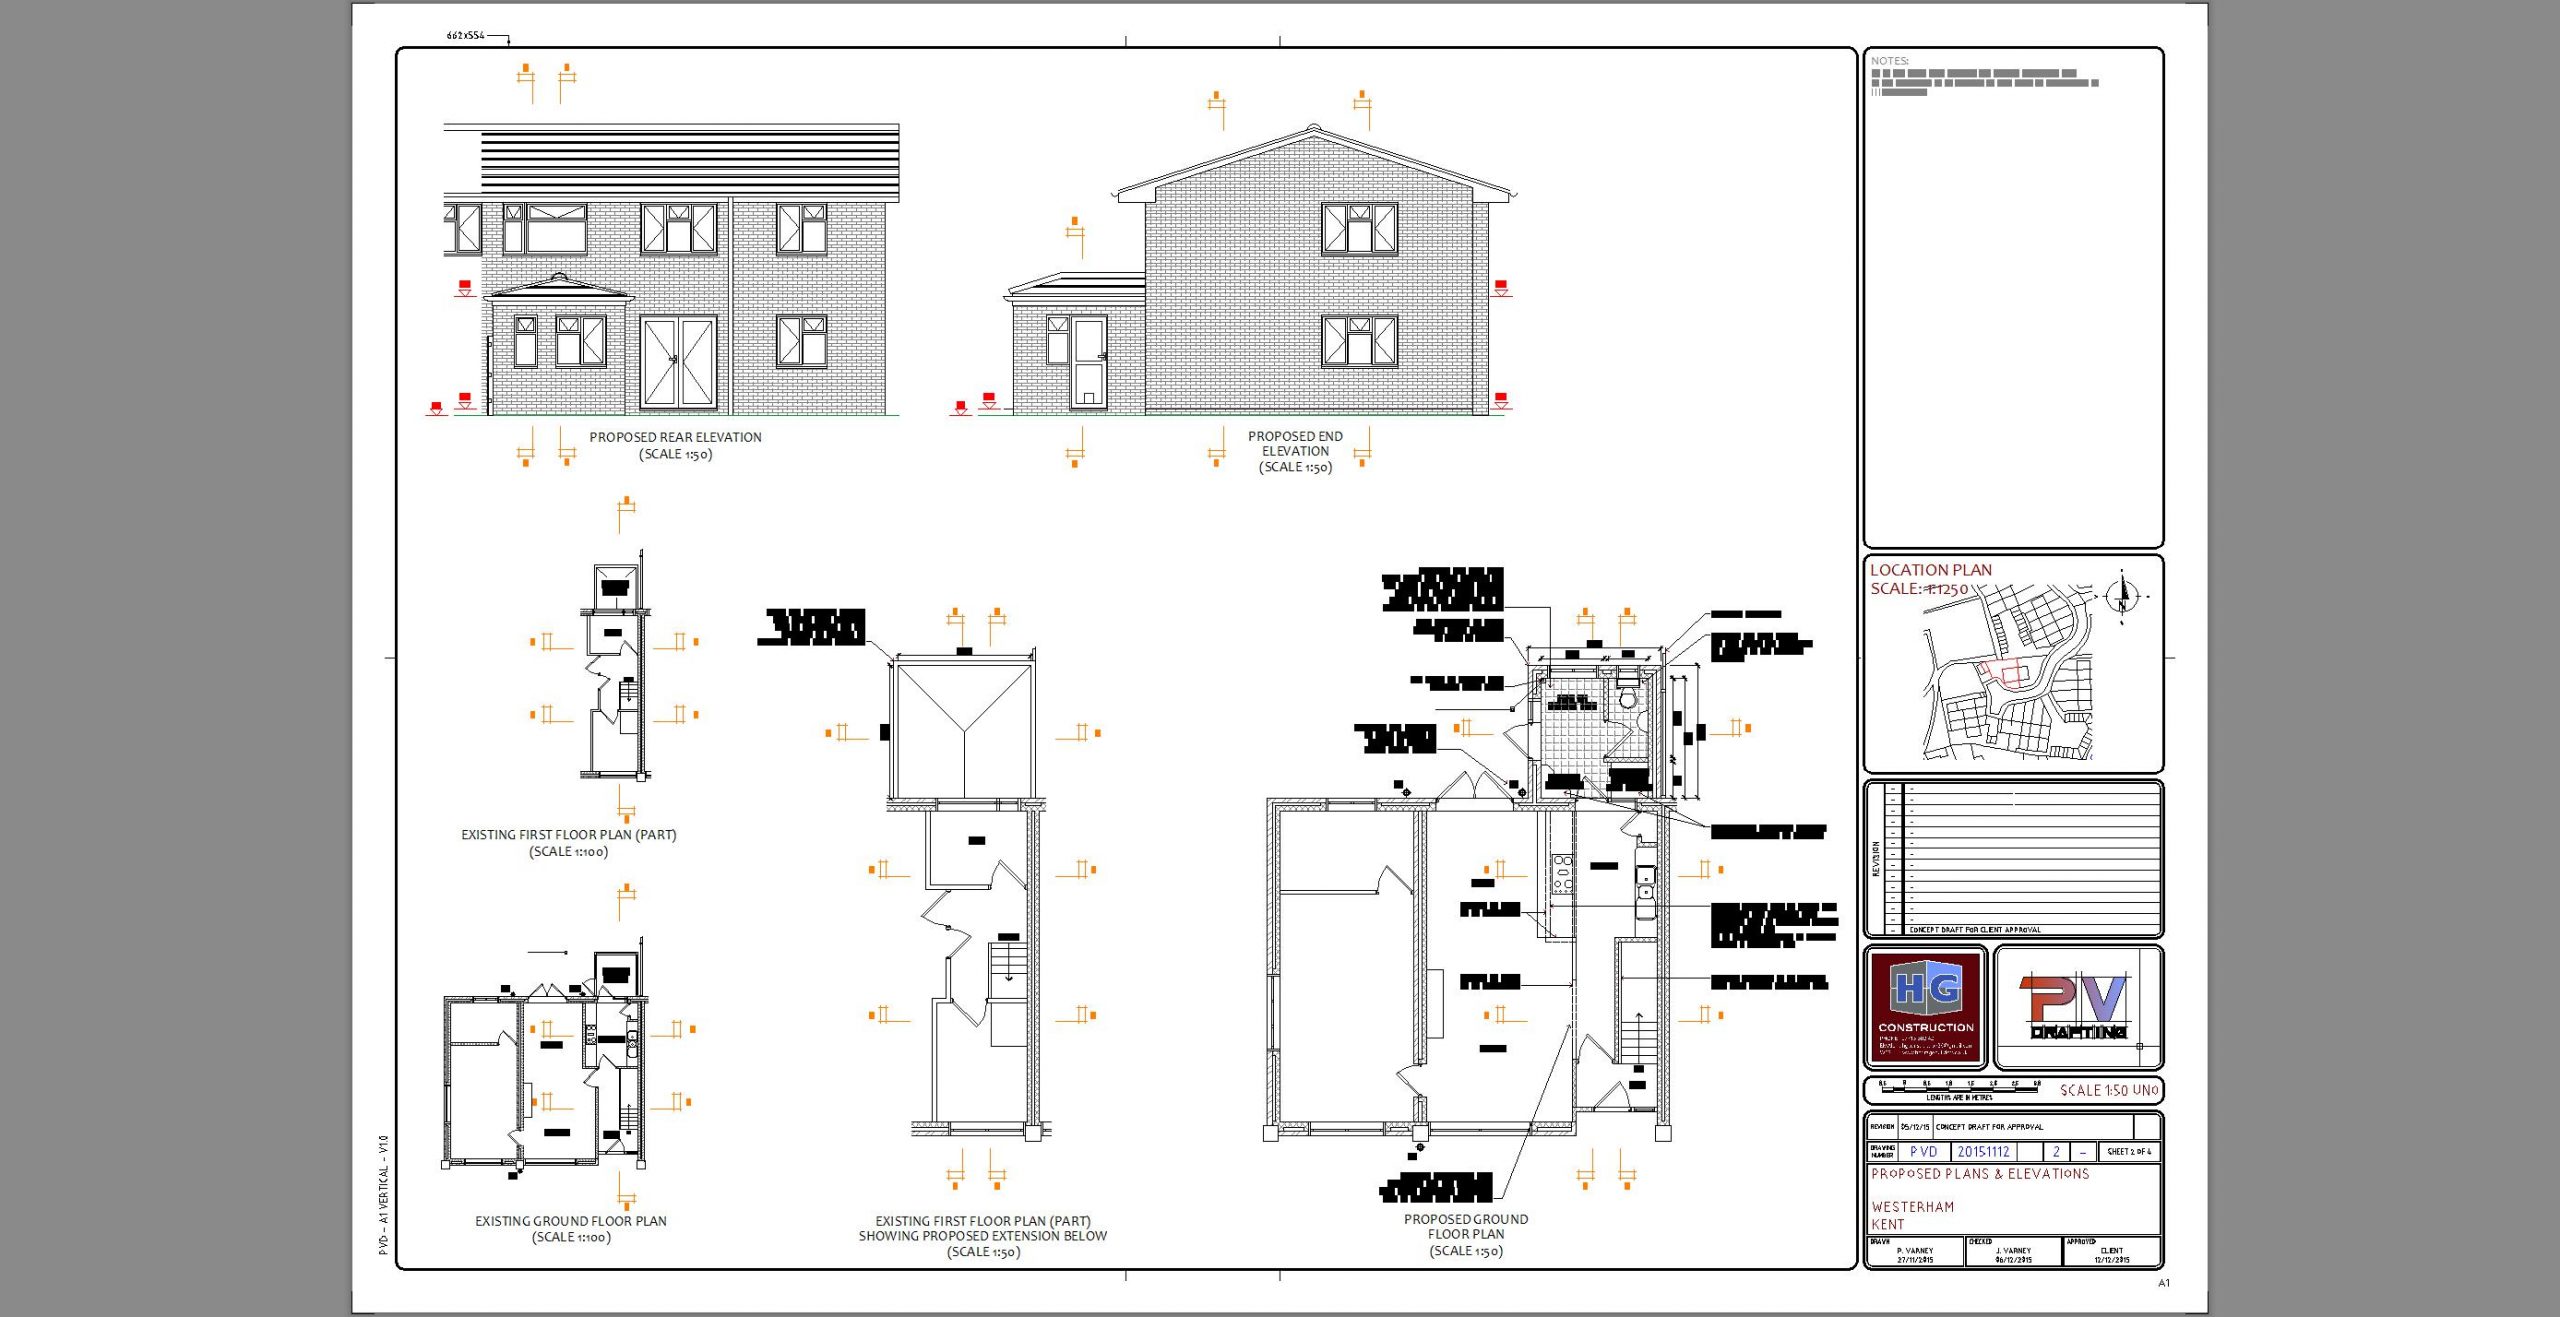 Planning Application Drawing - Westerham Kent - Proposed Plans & Elevations